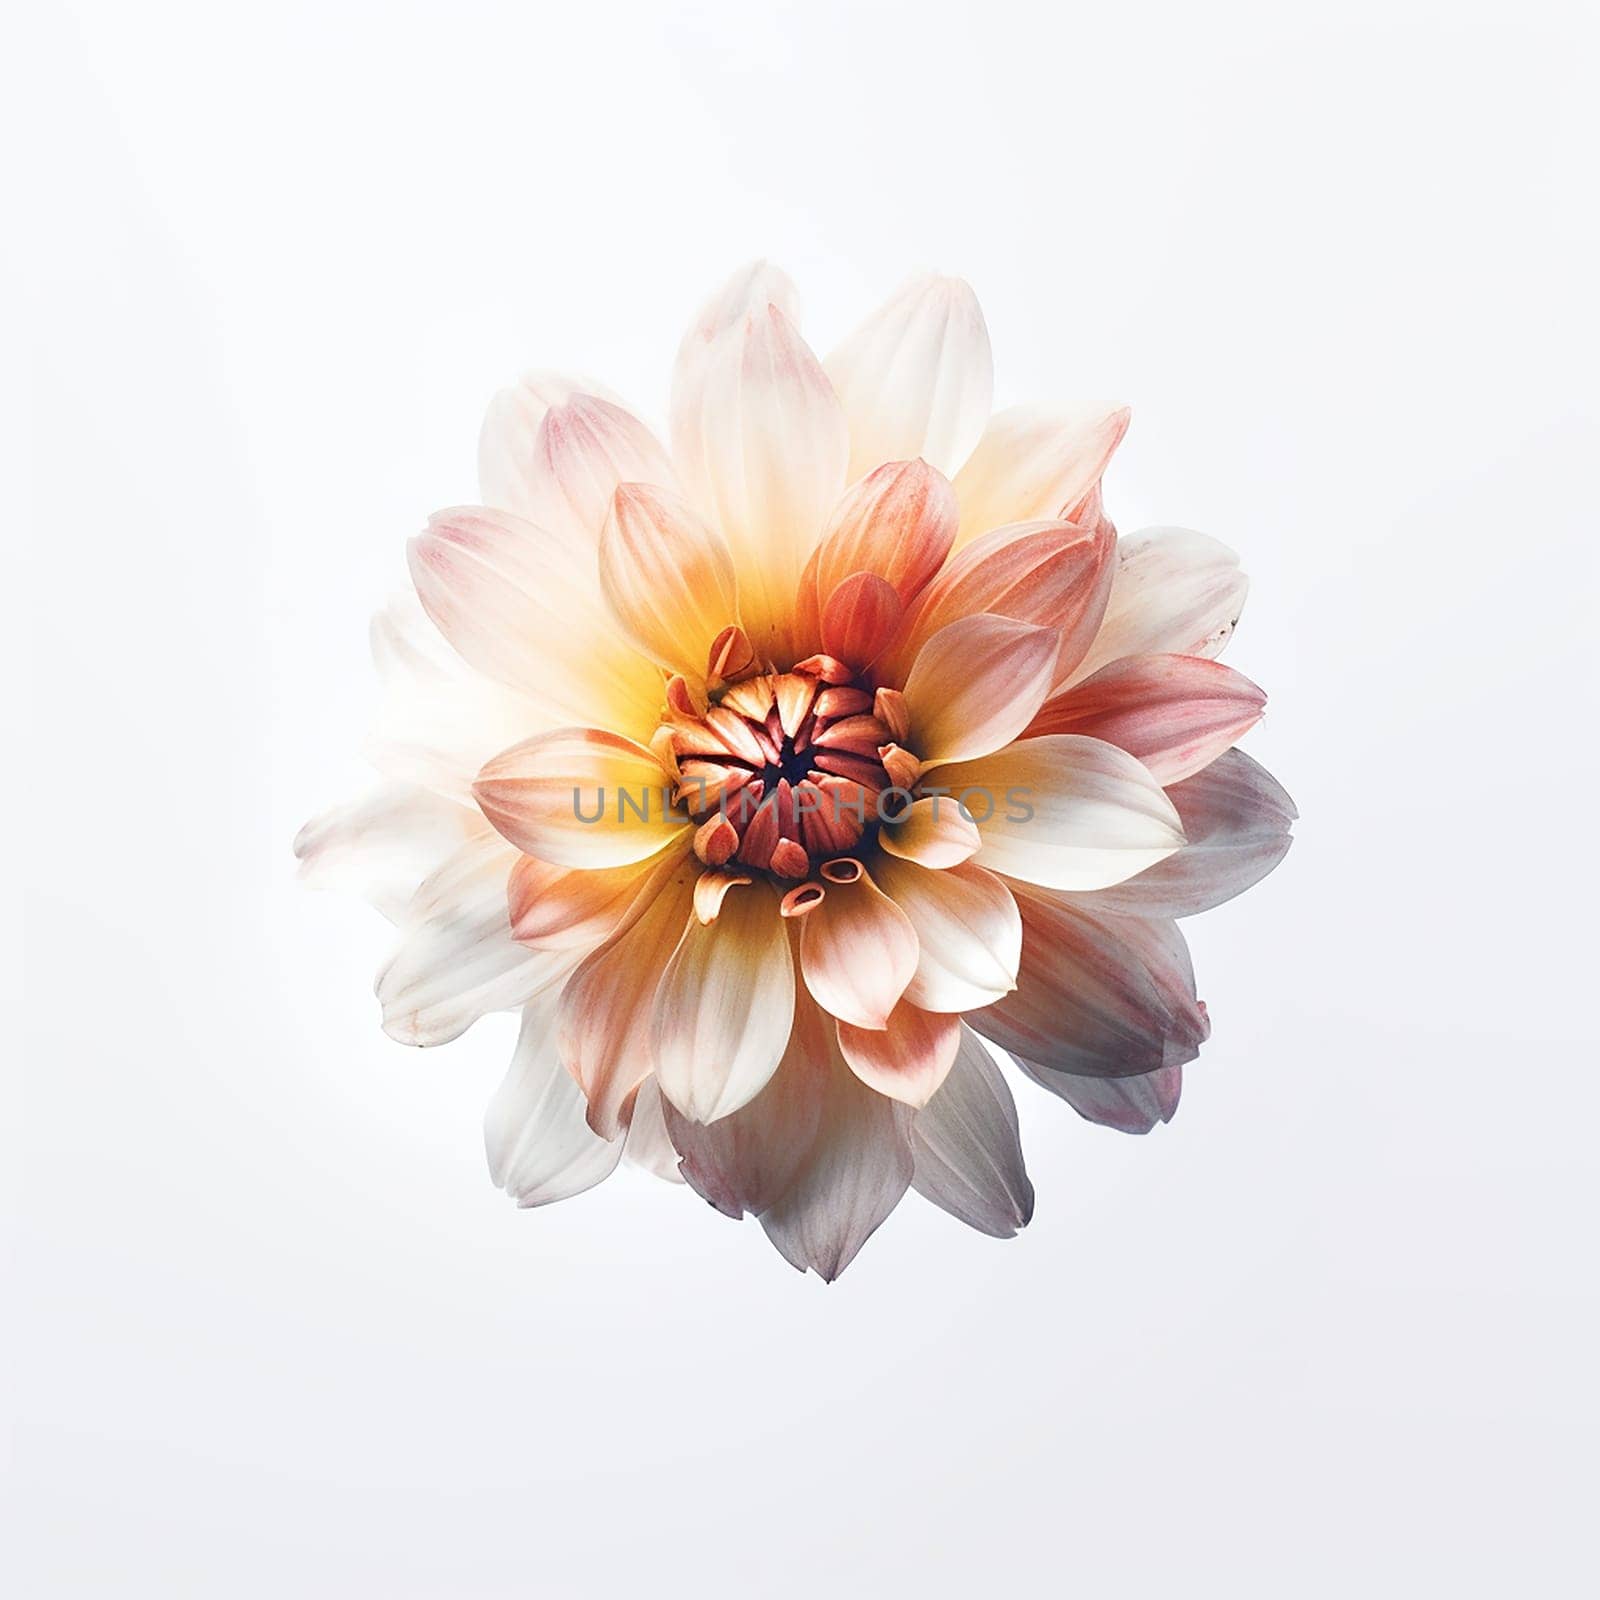 An isolated delicate dahlia with gradient petals against a white background by Hype2art